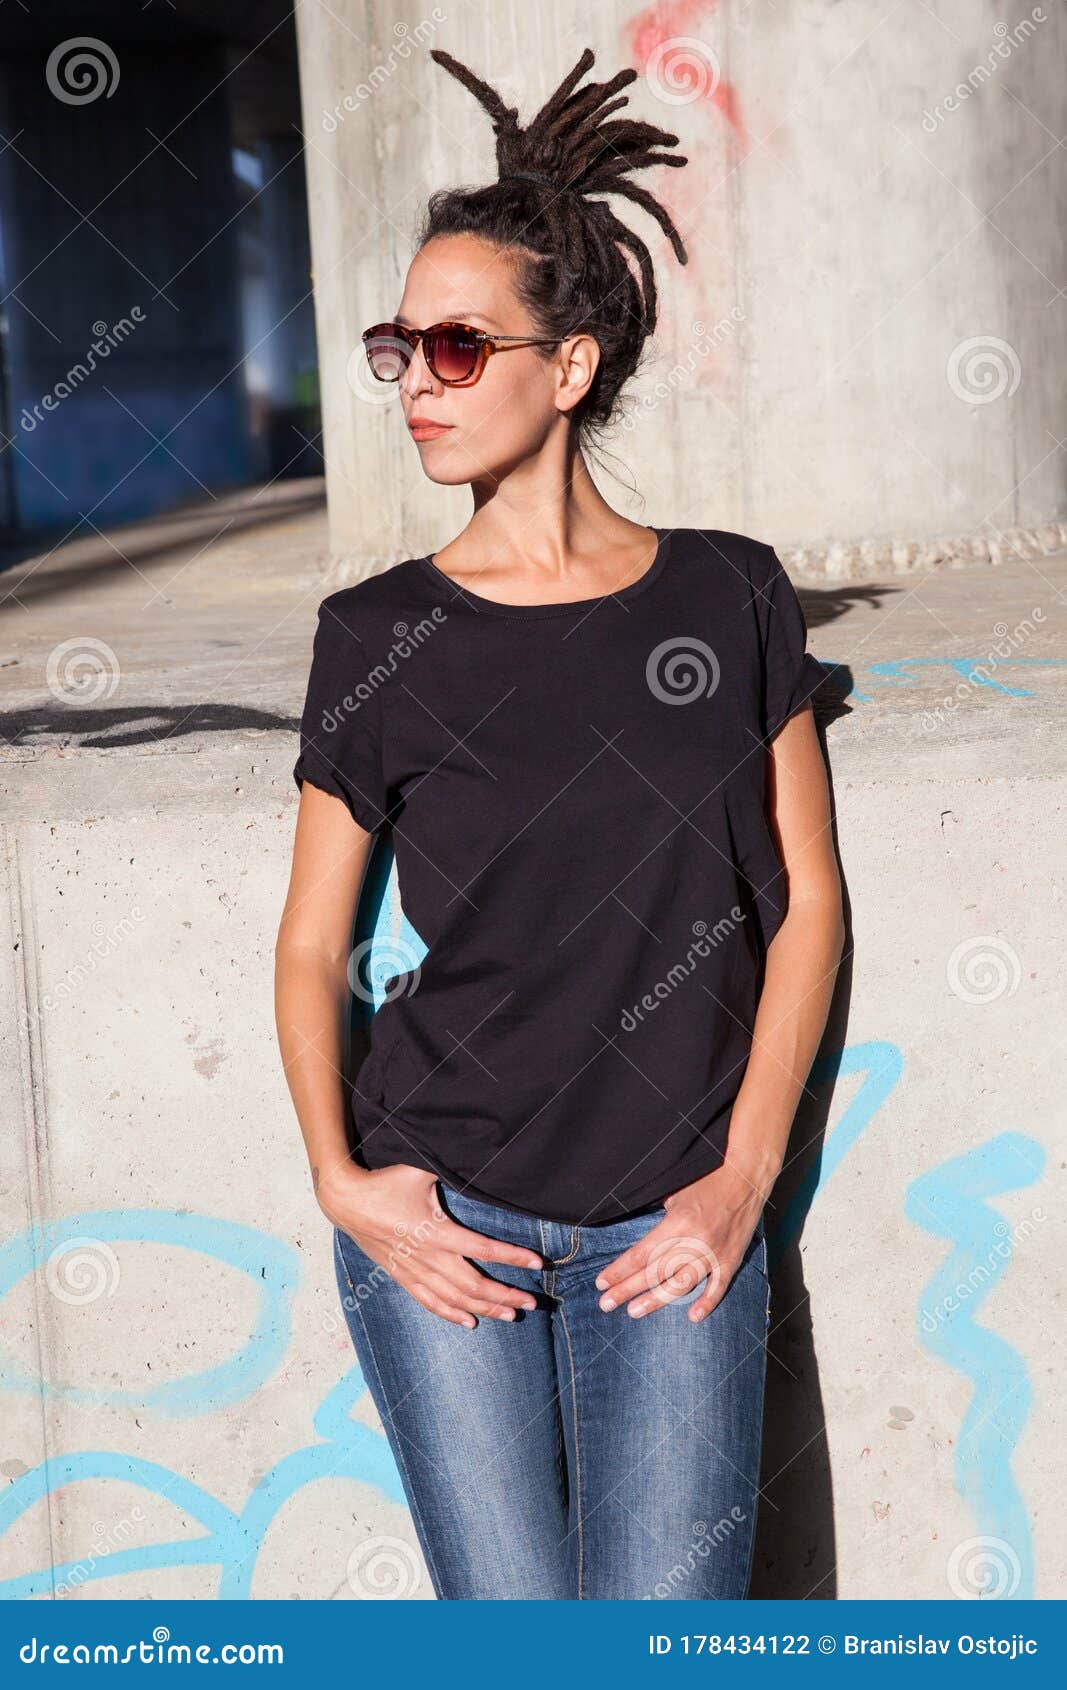 Young Woman in Black T Shirt and Jeans with Dreadlocks Hairstyle Sunglasses  and Outdoor in City Spring Summer Day Stock Photo - Image of hairstyle,  woman: 178434122